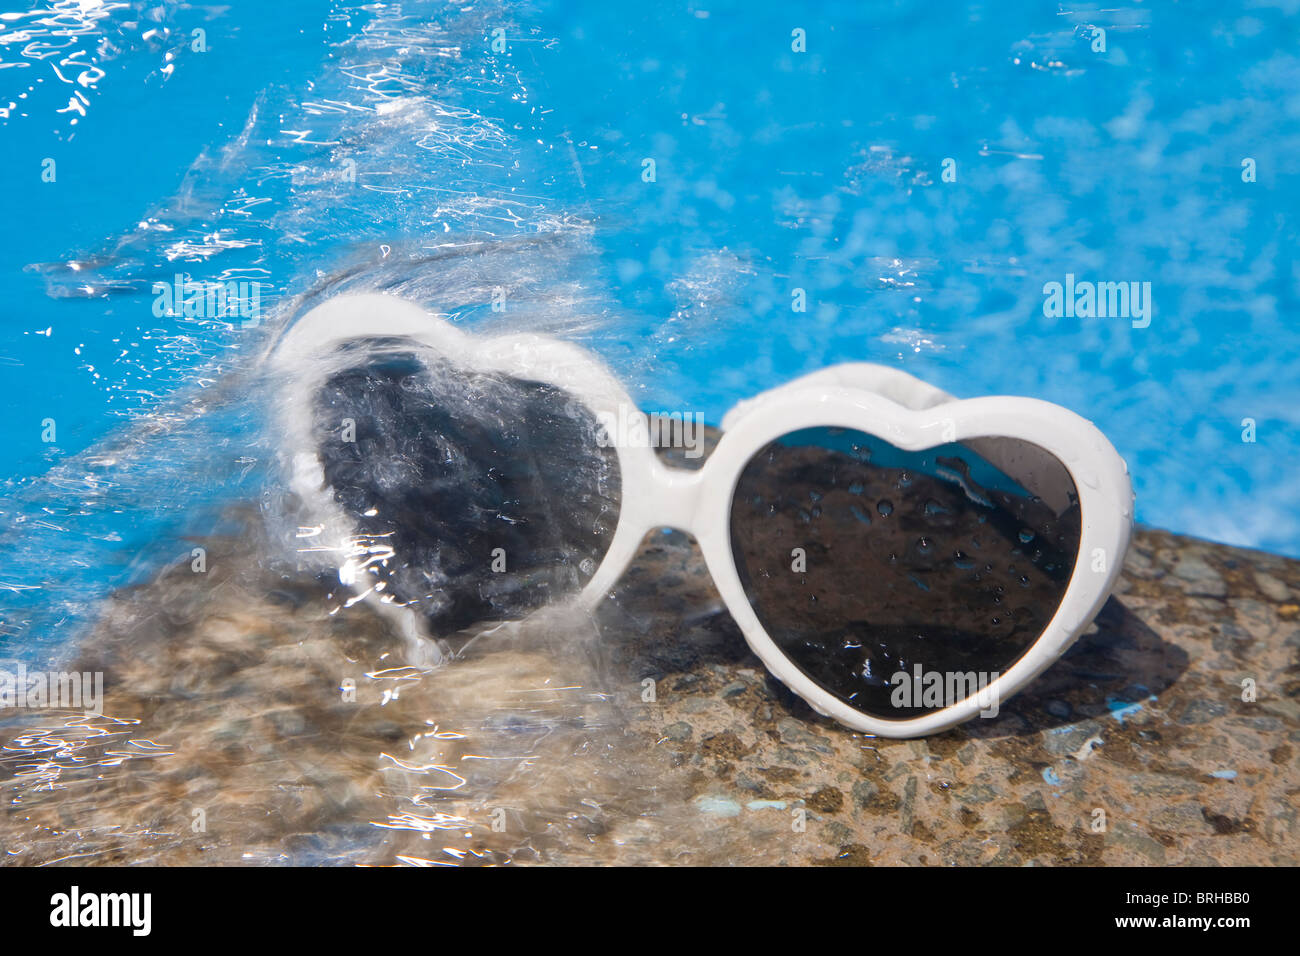 Heart shaped sunglasses by a bright blur swimming pool with splashing water Stock Photo